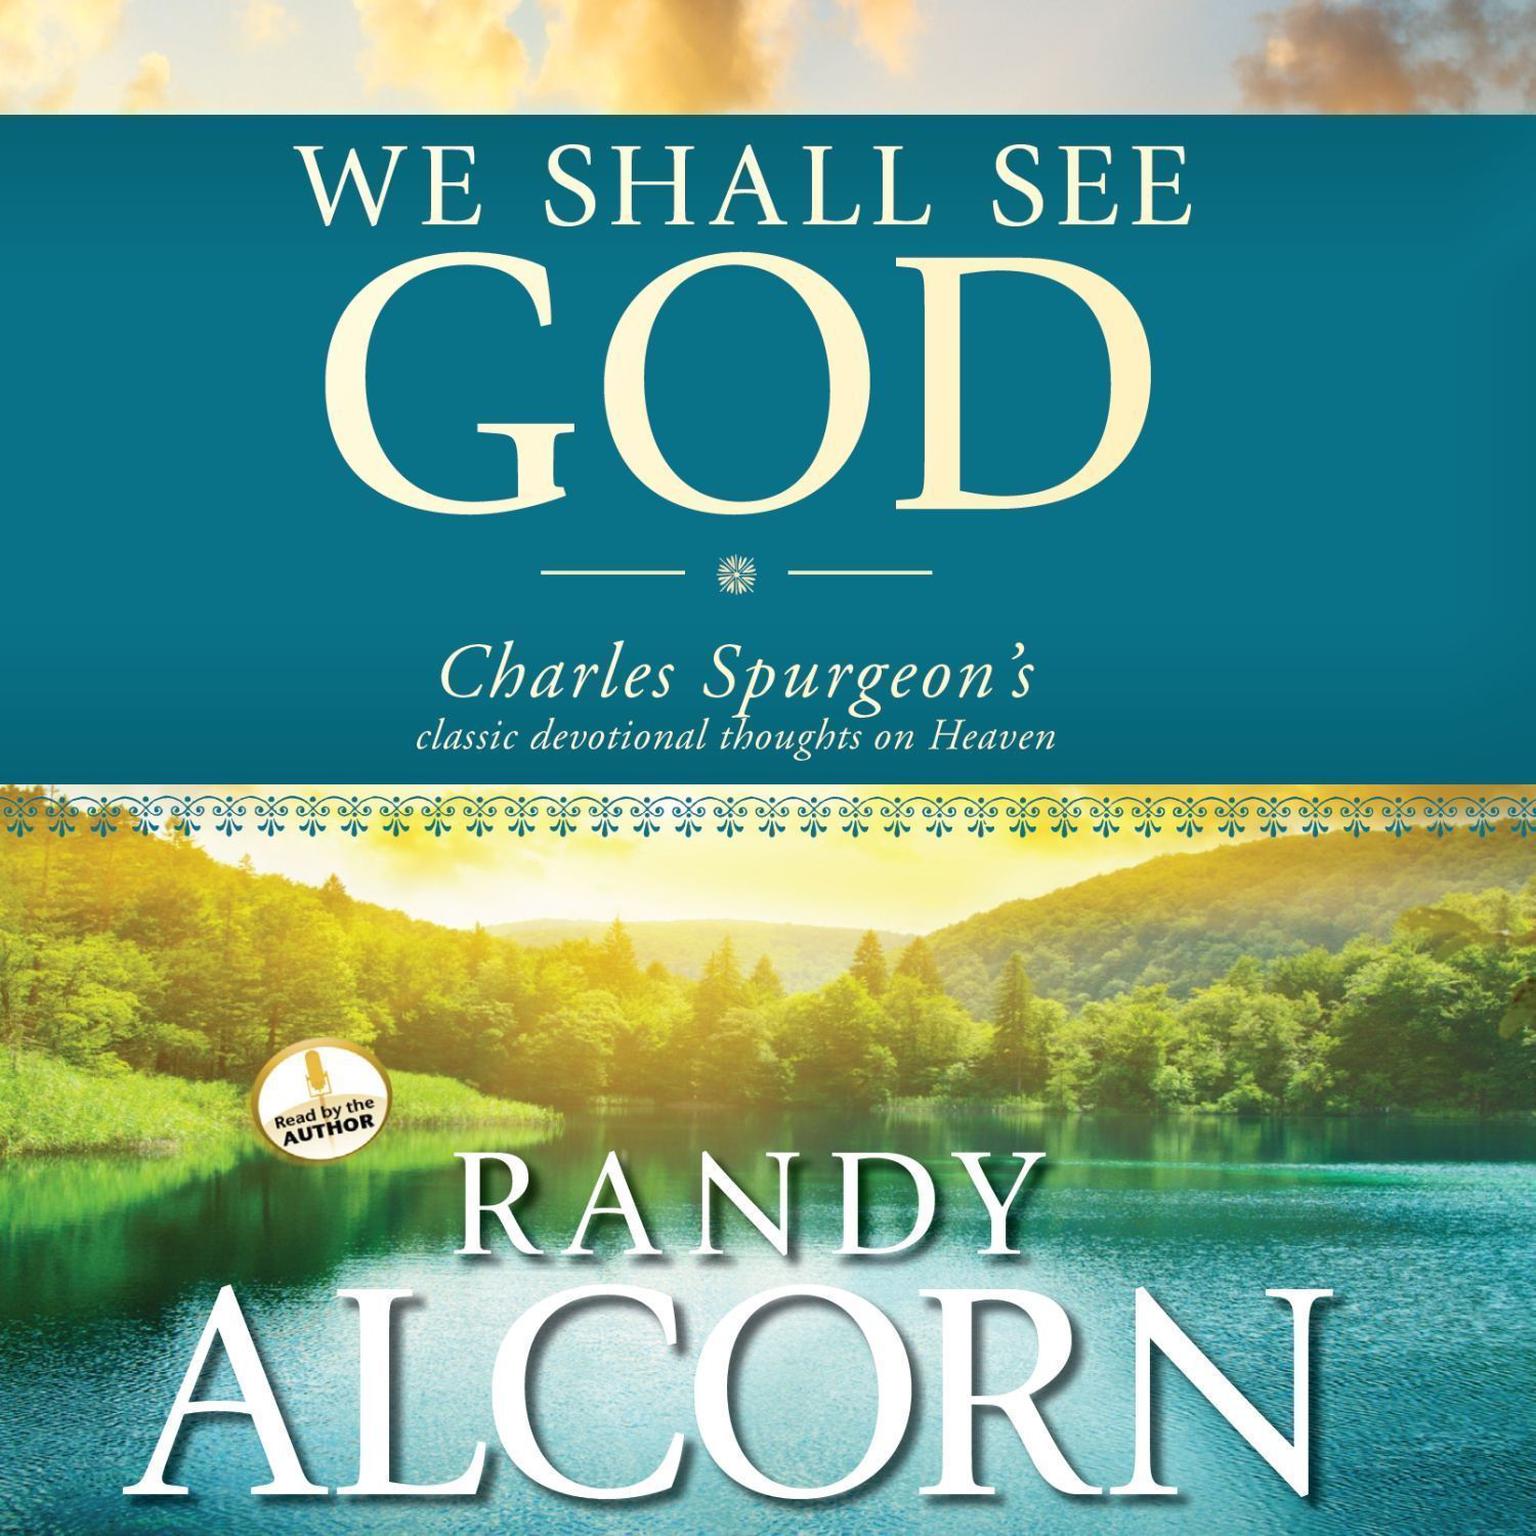 We Shall See God: Charles Spurgeons Classic Devotional Thoughts on Heaven Audiobook, by Randy Alcorn